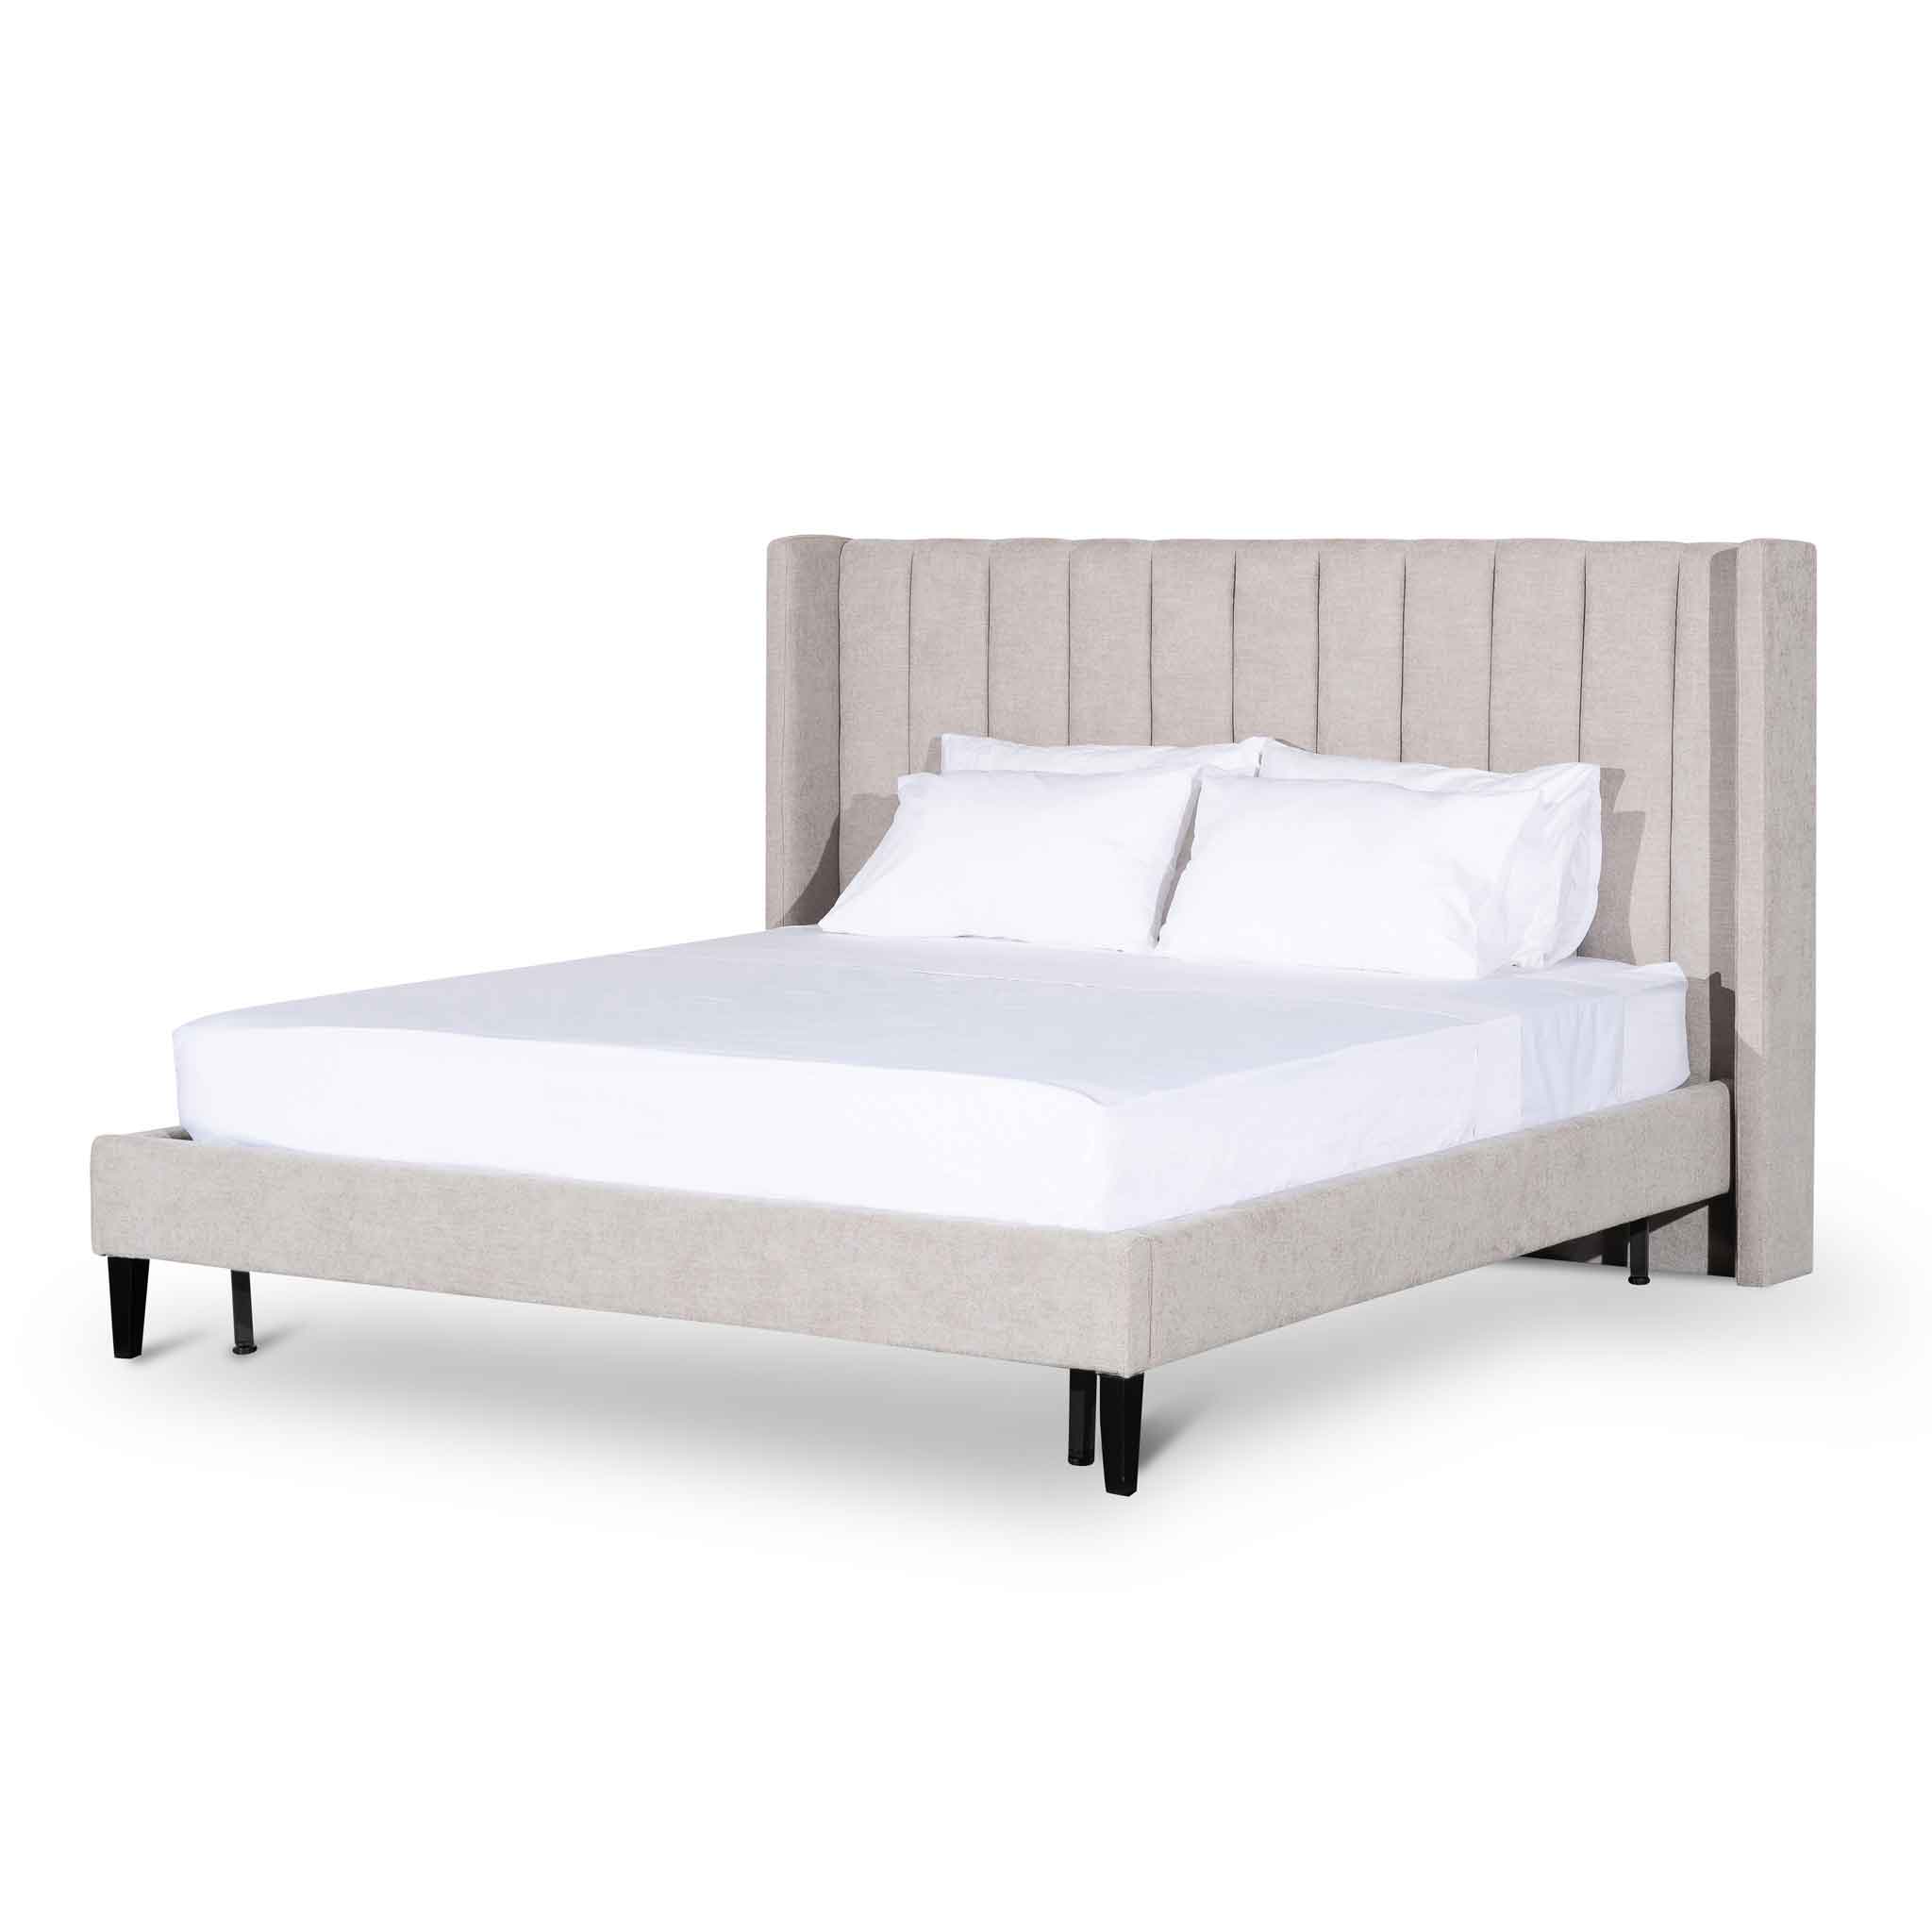 Lucy King Bed Frame - Comfort Grey